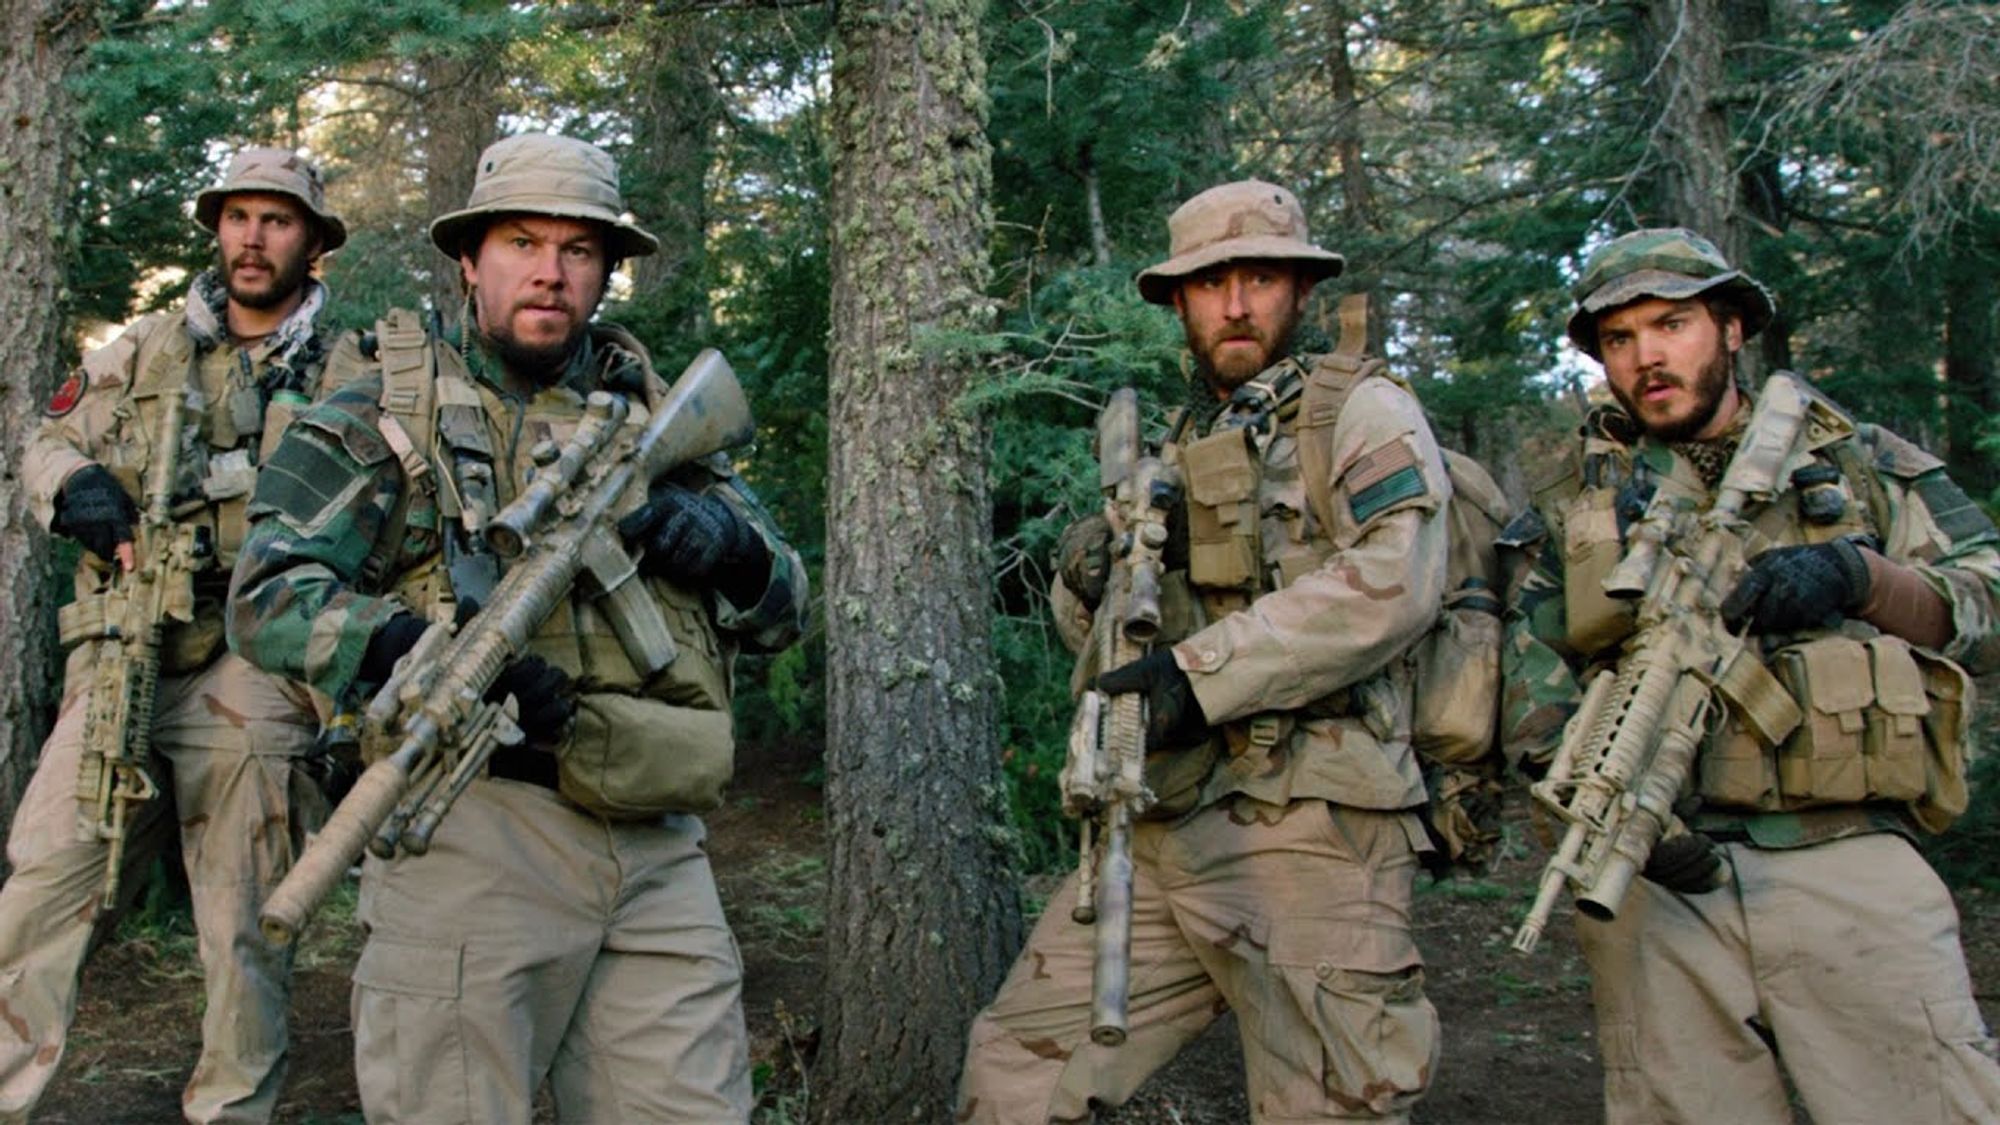 Lone Survivor' star: Let's 'square up' with veterans